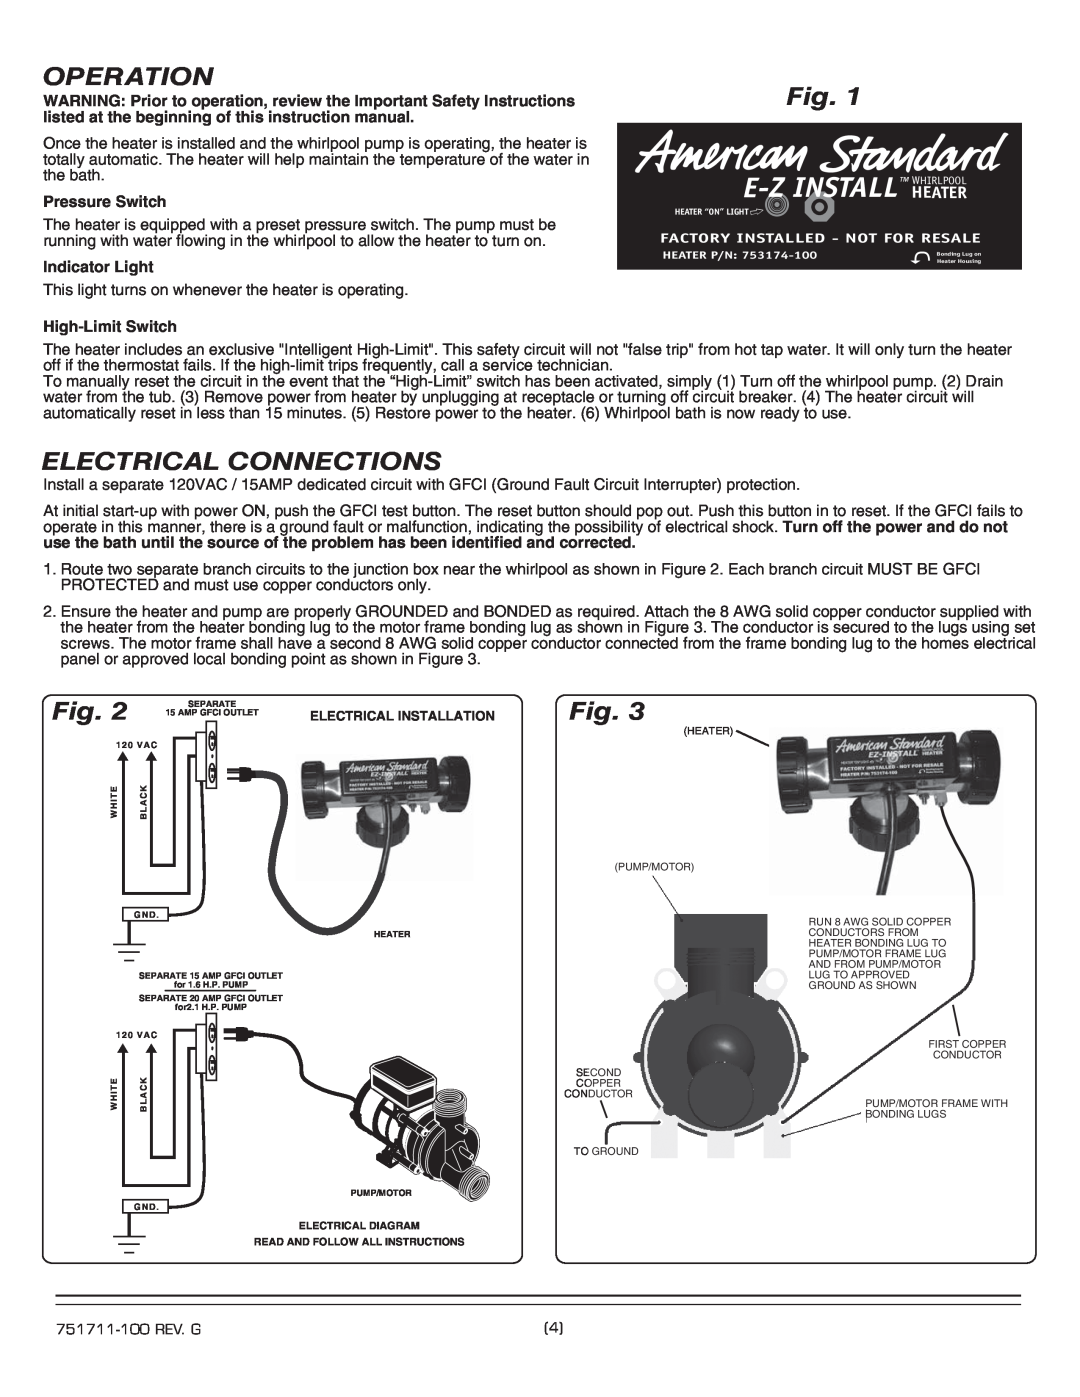 American Standard 751711-100 E-Z Install, Operation, Electrical Connections, Pressure Switch, Indicator Light 